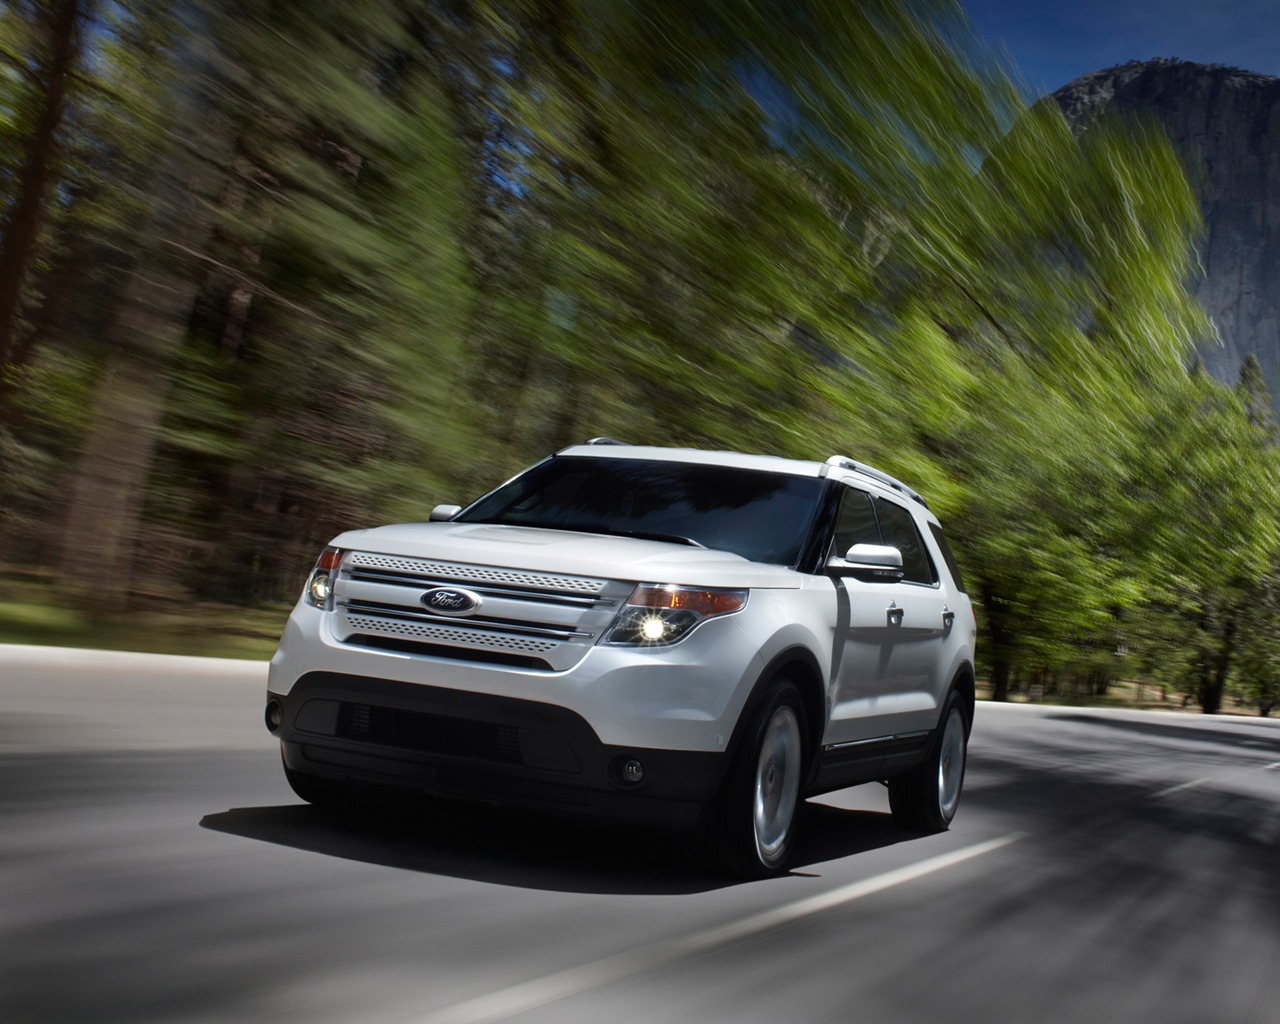 Ford Explorer Limited - 2011 福特17 - 1280x1024